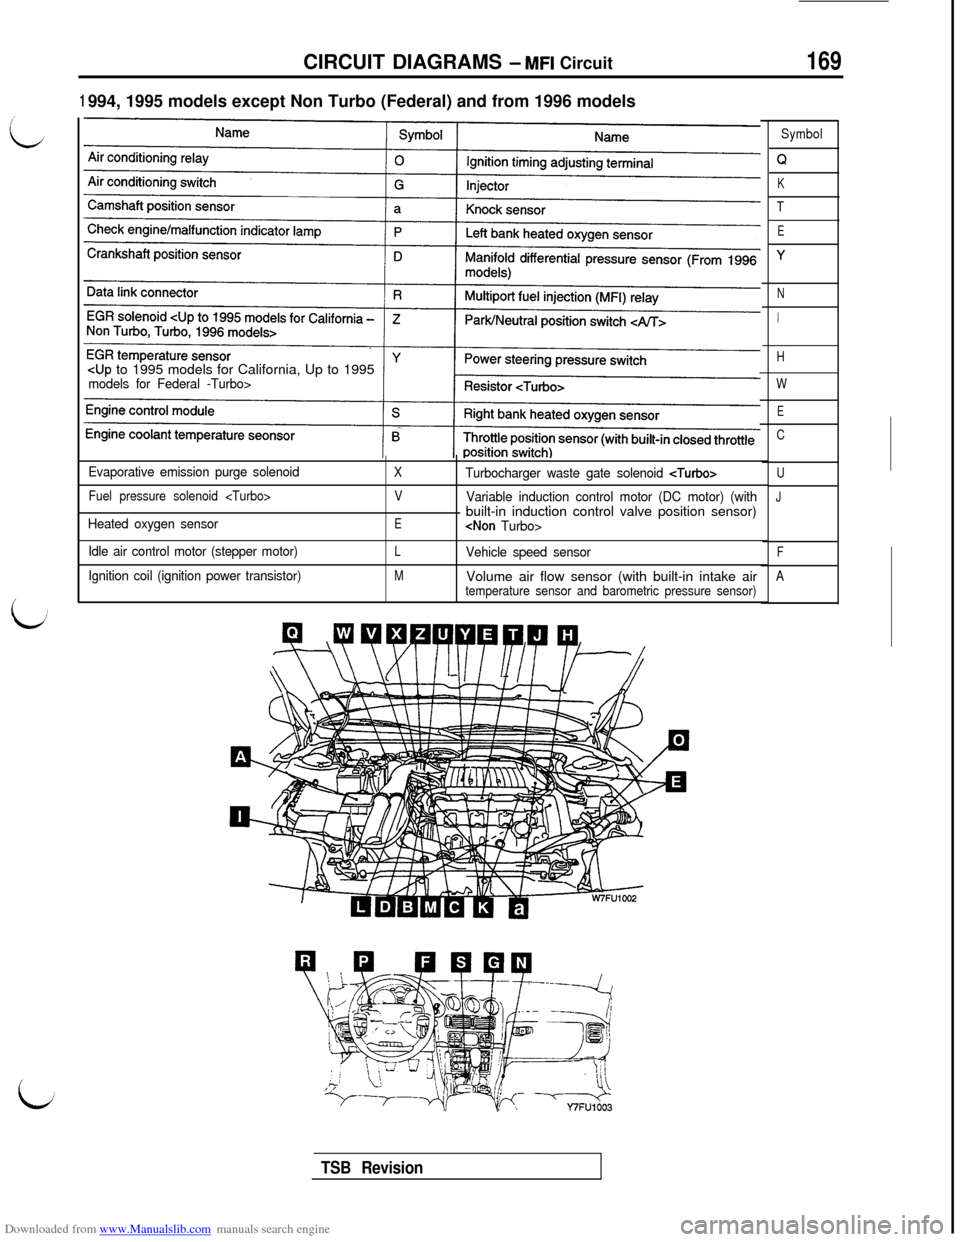 MITSUBISHI 3000GT 1995 2.G Workshop Manual Downloaded from www.Manualslib.com manuals search engine CIRCUIT DIAGRAMS - MFI Circuit169
i
L
iJ
1994, 1995 models except Non Turbo (Federal) and from 1996 models
<Up to 1995 models for California, U